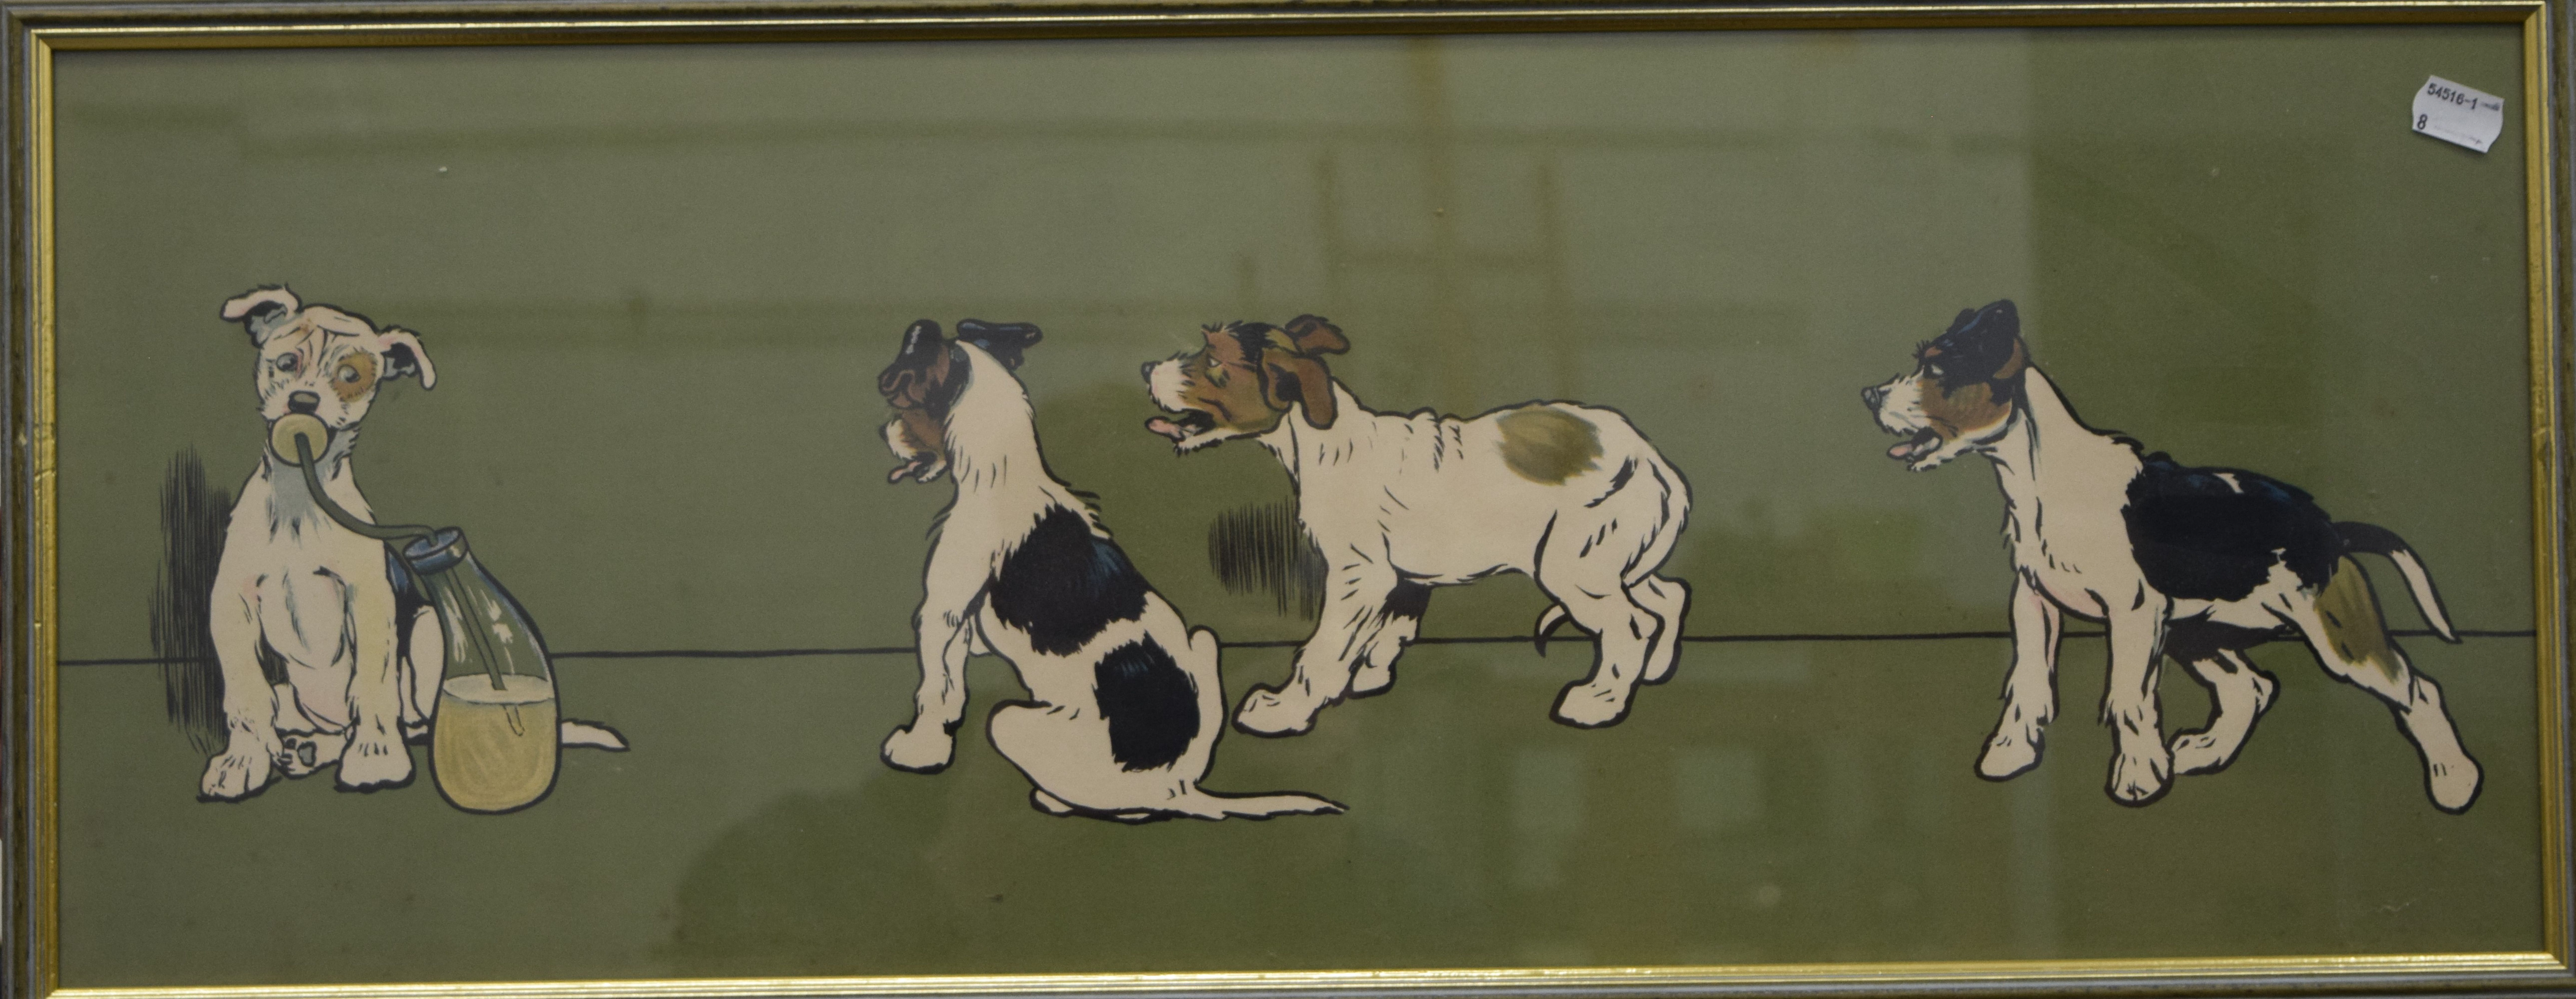 Three CECIL ALDIN type prints, each framed and glazed. Each 69.5 x 26 cm. - Image 6 of 6